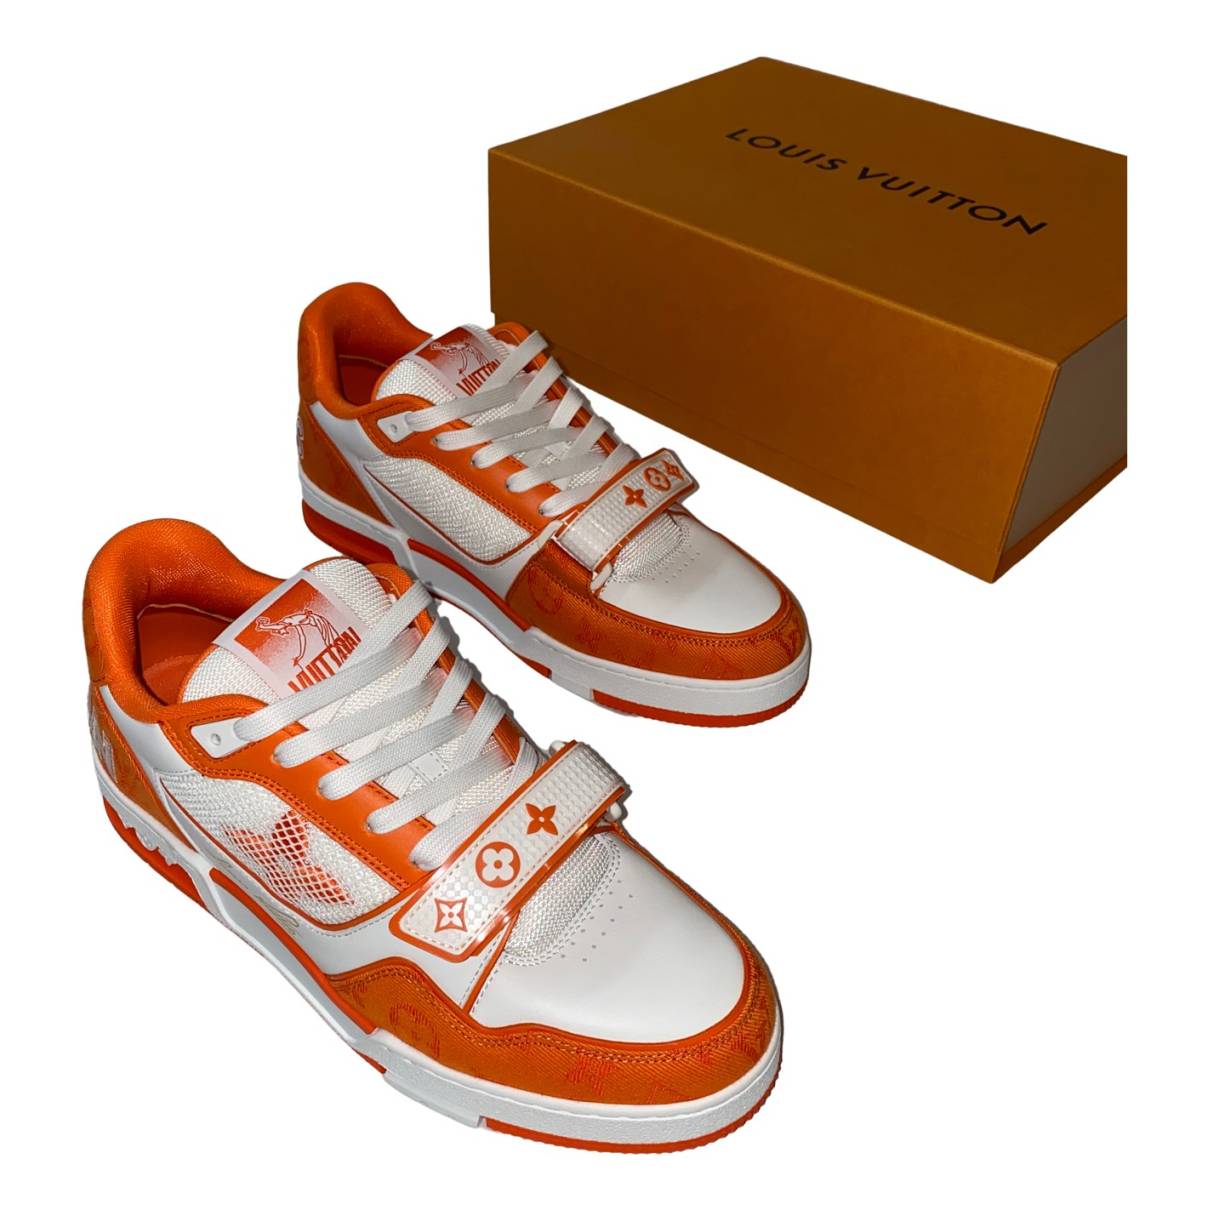 Lv trainer leather low trainers Louis Vuitton Orange size 7 UK in